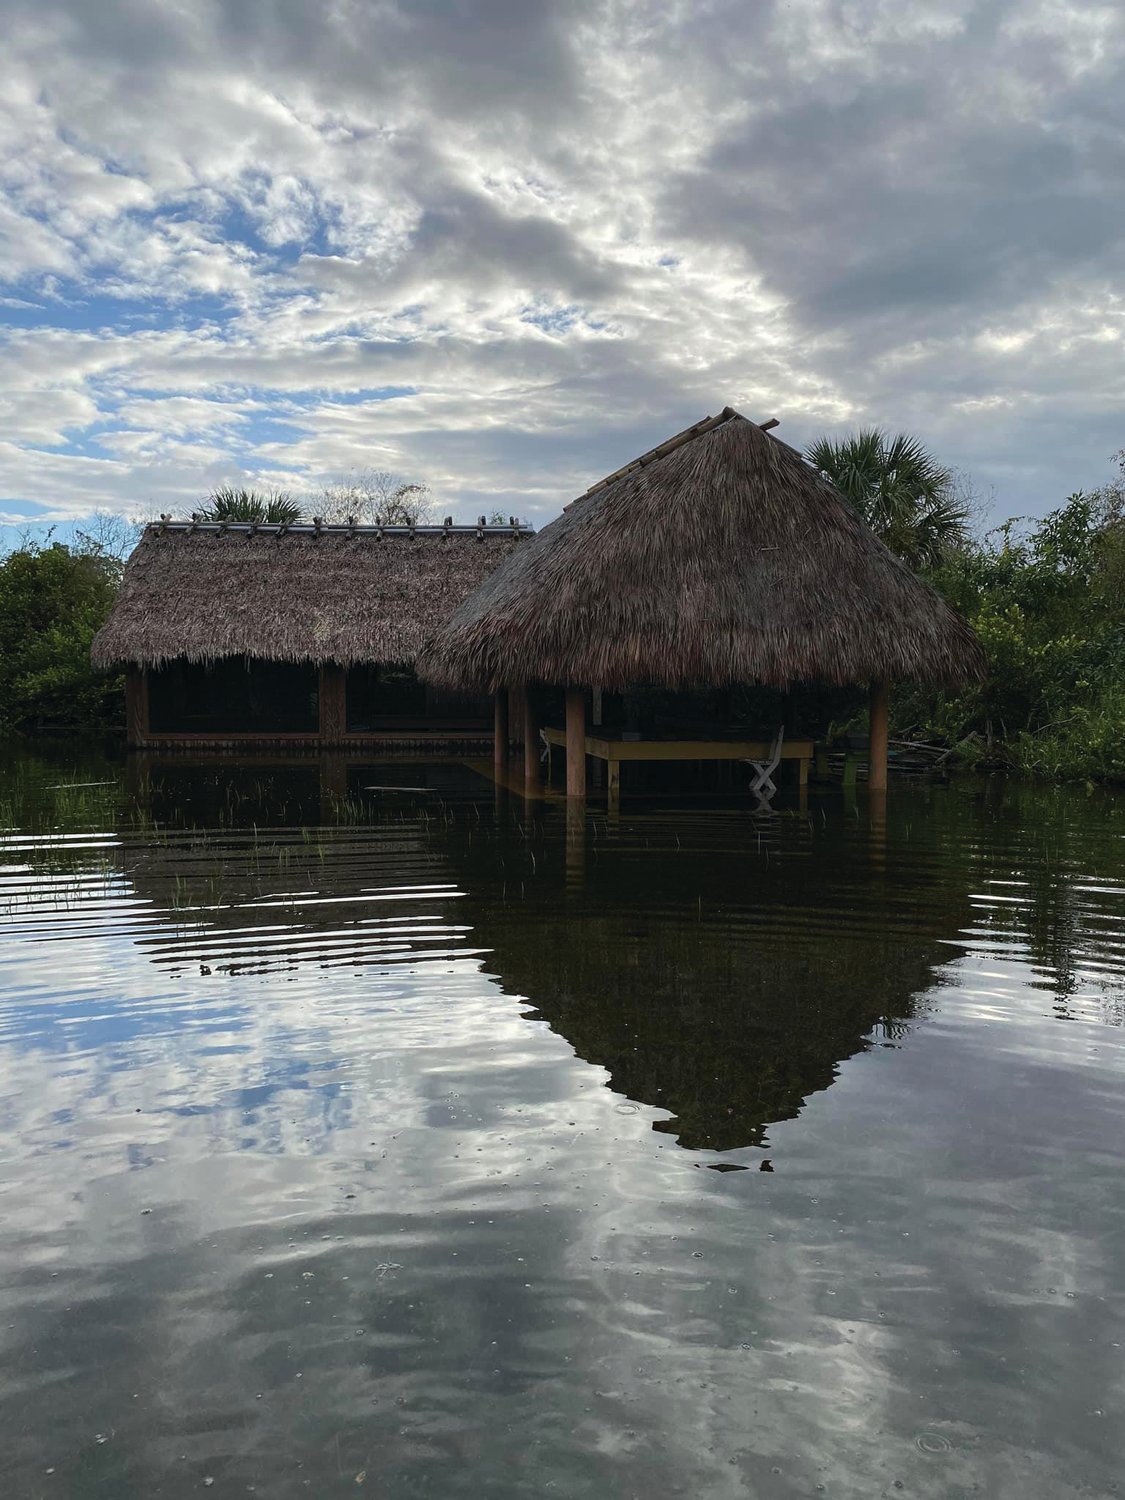 Betty Osceola of the Miccosukee Tribe shared photos of flooded chickees after touring tribal land in the Everglades last week.